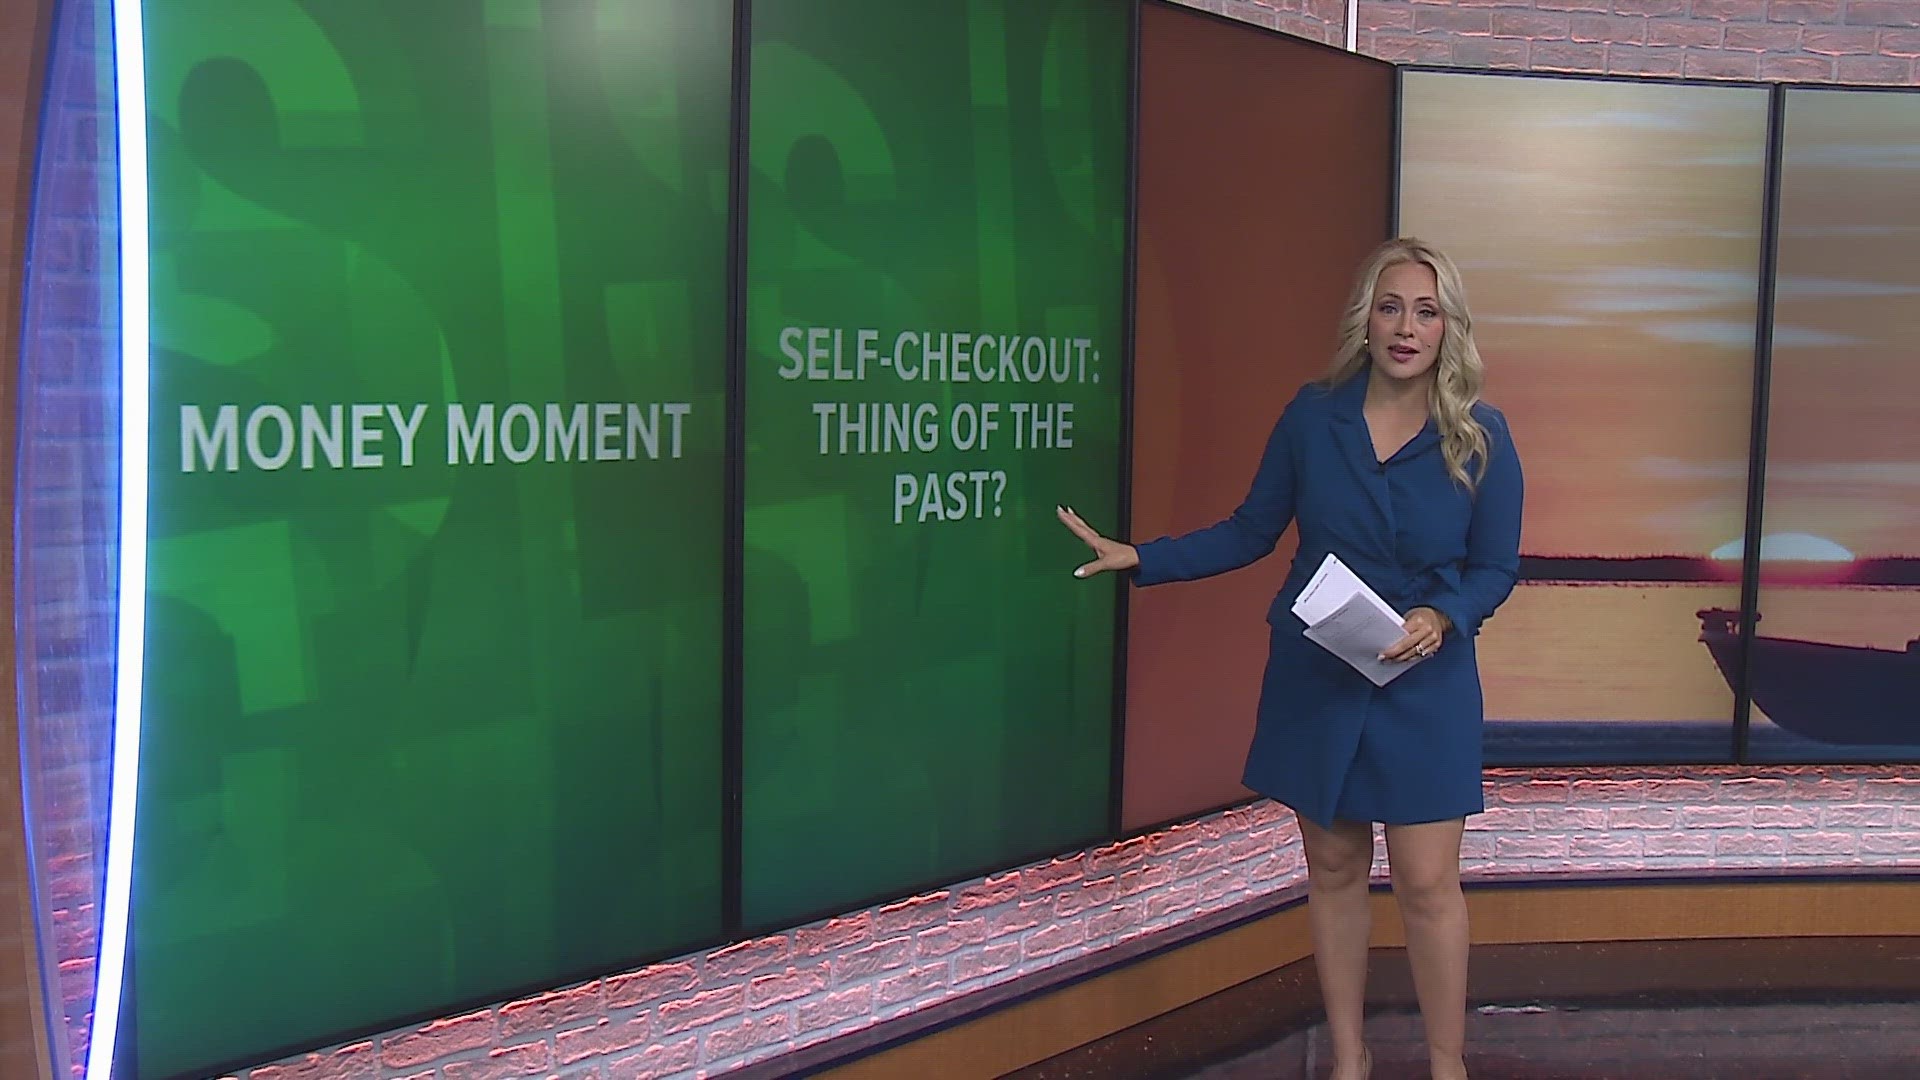 WWL Louisiana's Brheanna Boudreaux has the latest on retailers removing self-checkout lines, and Caitlin Clark's impact on the money WNBA offers to female players.